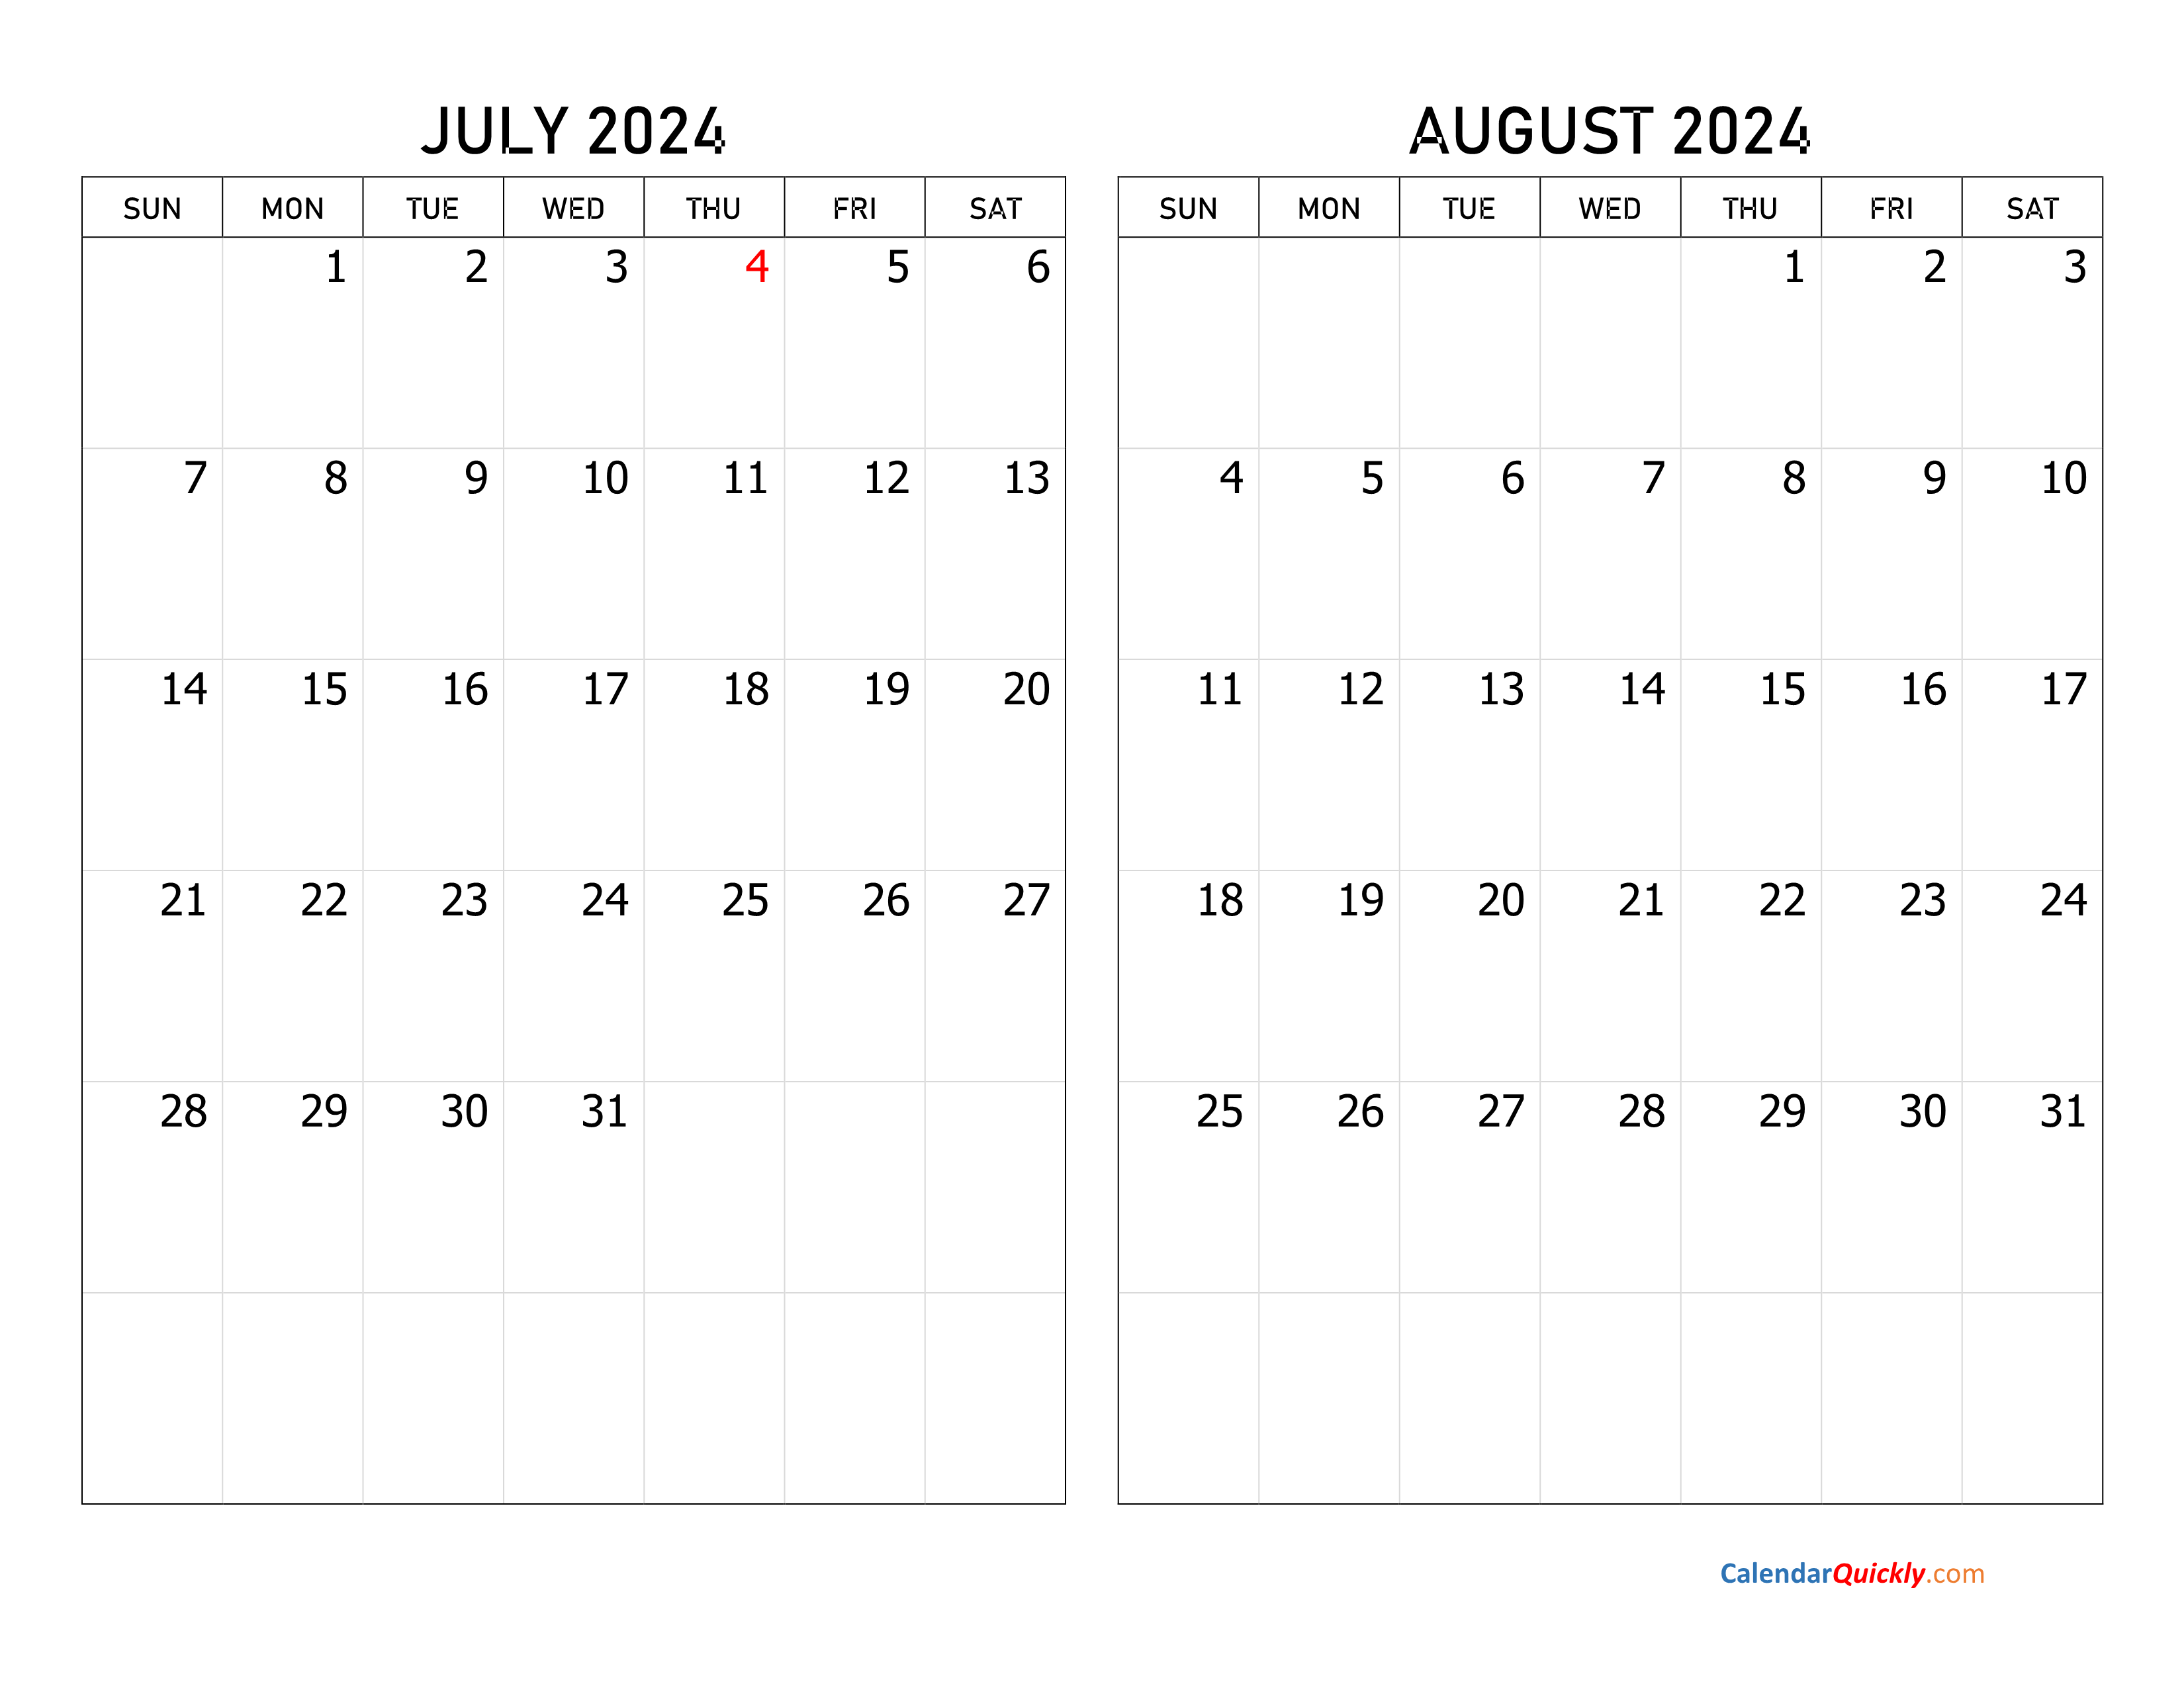 July and August 2024 Calendar Calendar Quickly